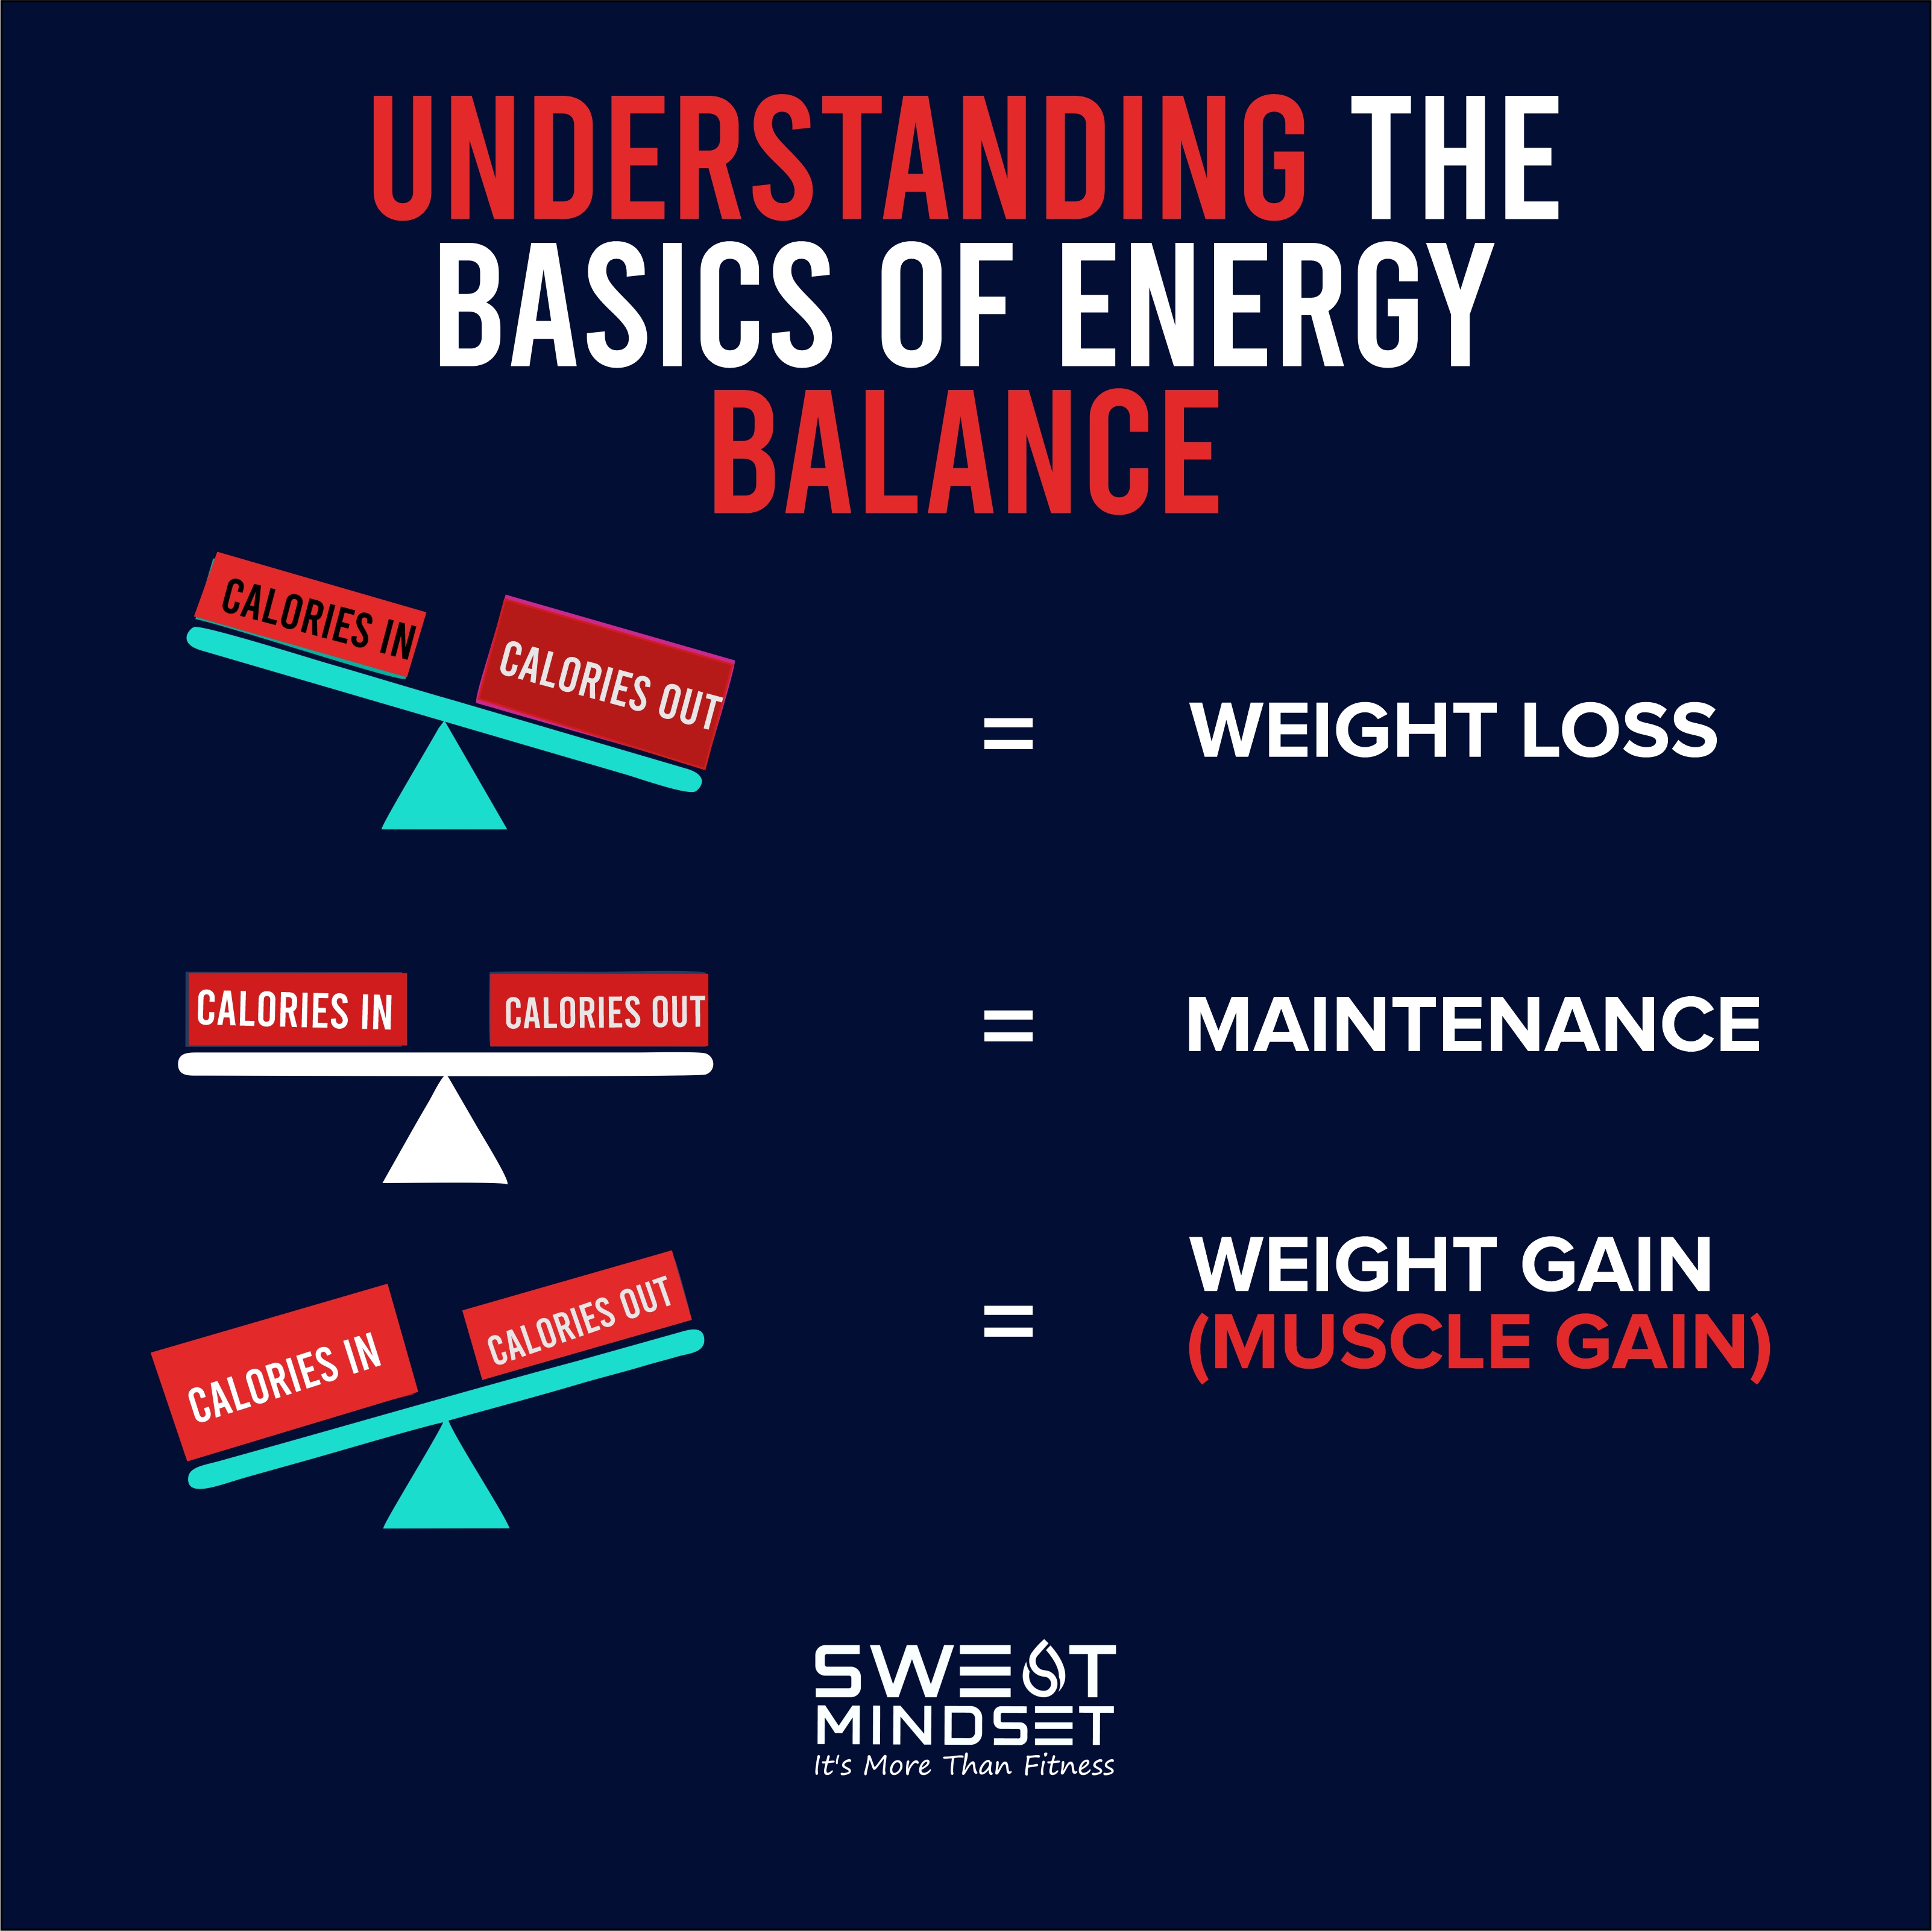 Energy balance and muscle gain